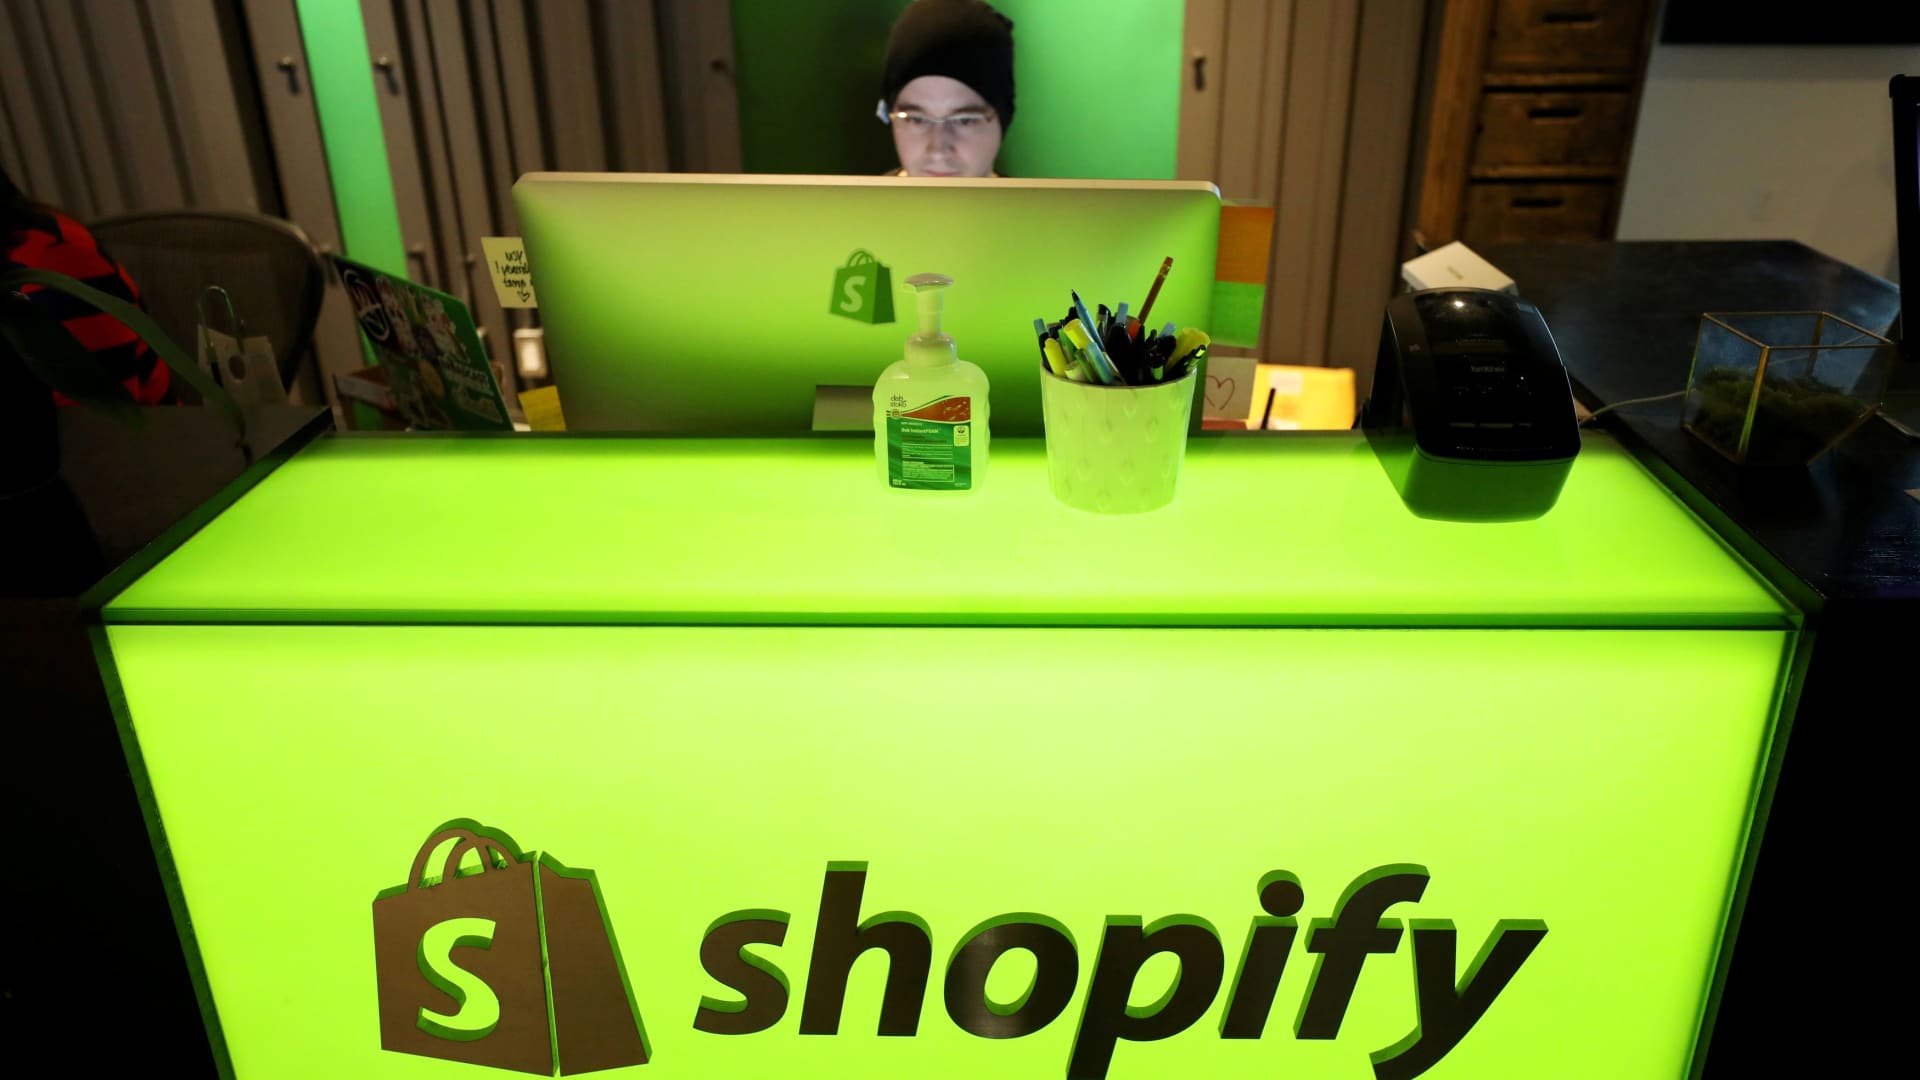 Shopify shares surge 20% on earnings beat, rosy guidance